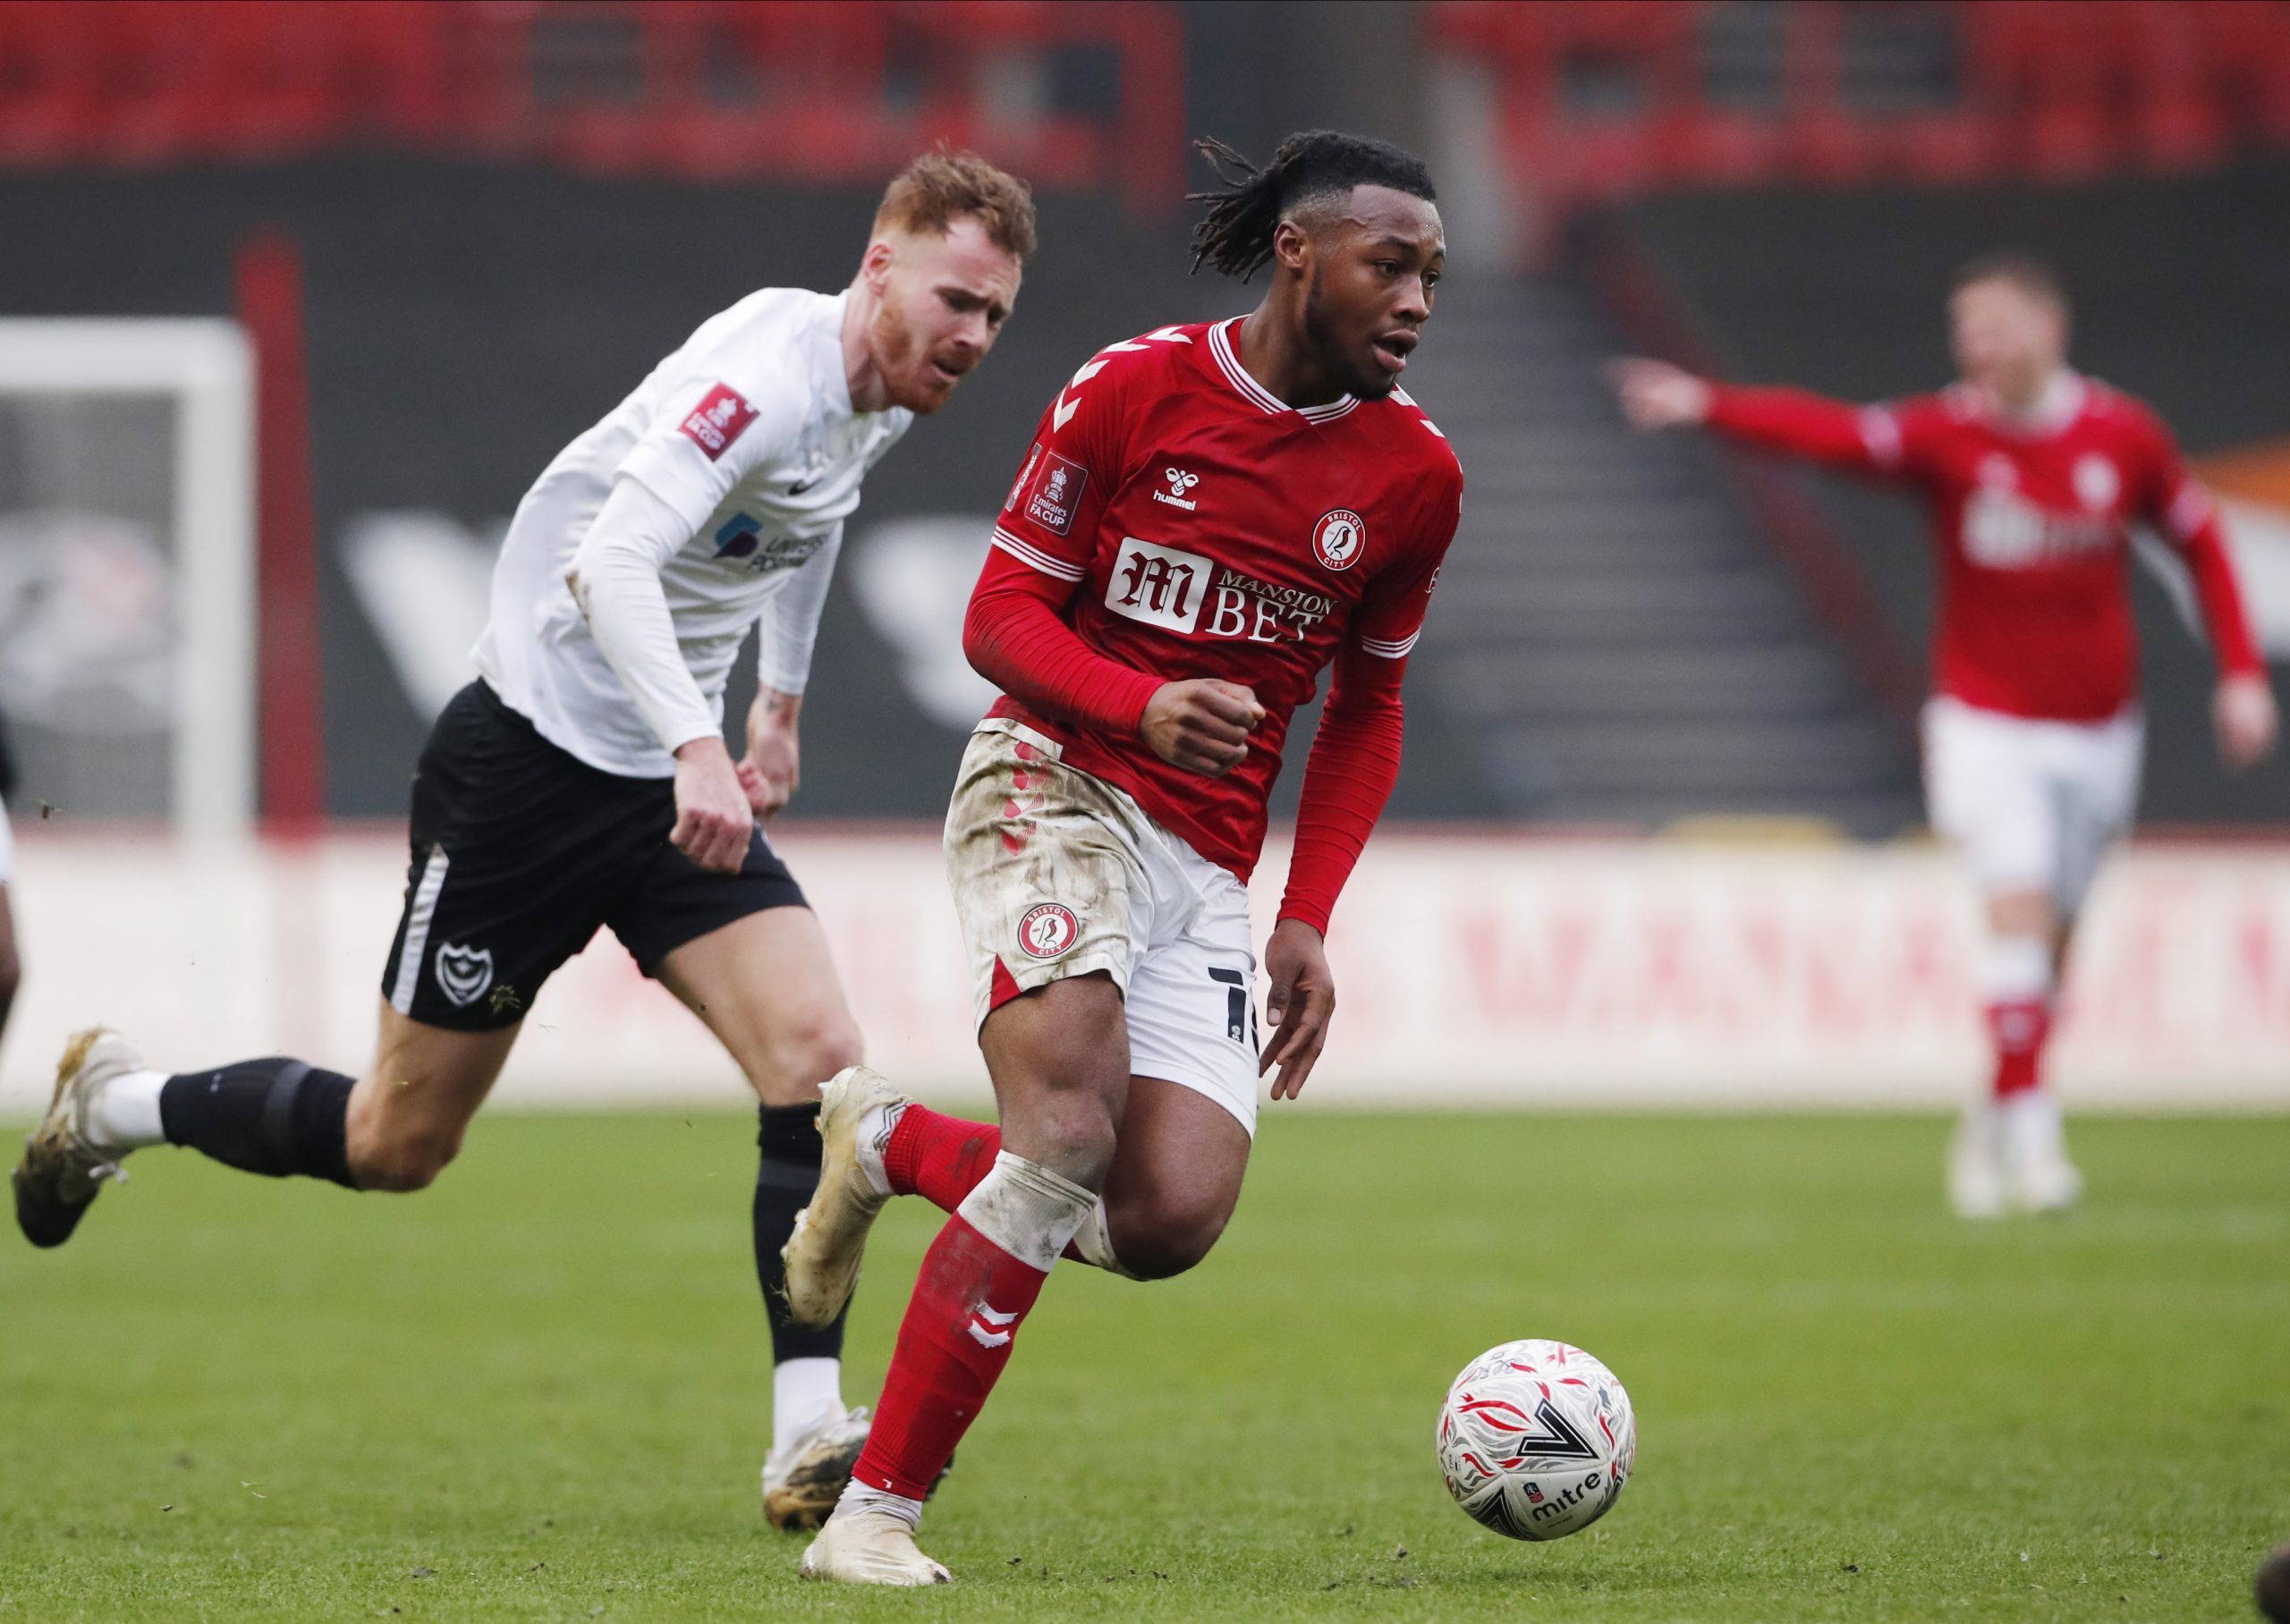 Soccer Football - FA Cup - Third Round - Bristol City v Portsmouth - Ashton Gate Stadium, Bristol, Britain - January 10, 2021 Bristol City's Antoine Semenyo in action with  Portsmouths' Tom Naylor Action Images via Reuters/Andrew Couldridge